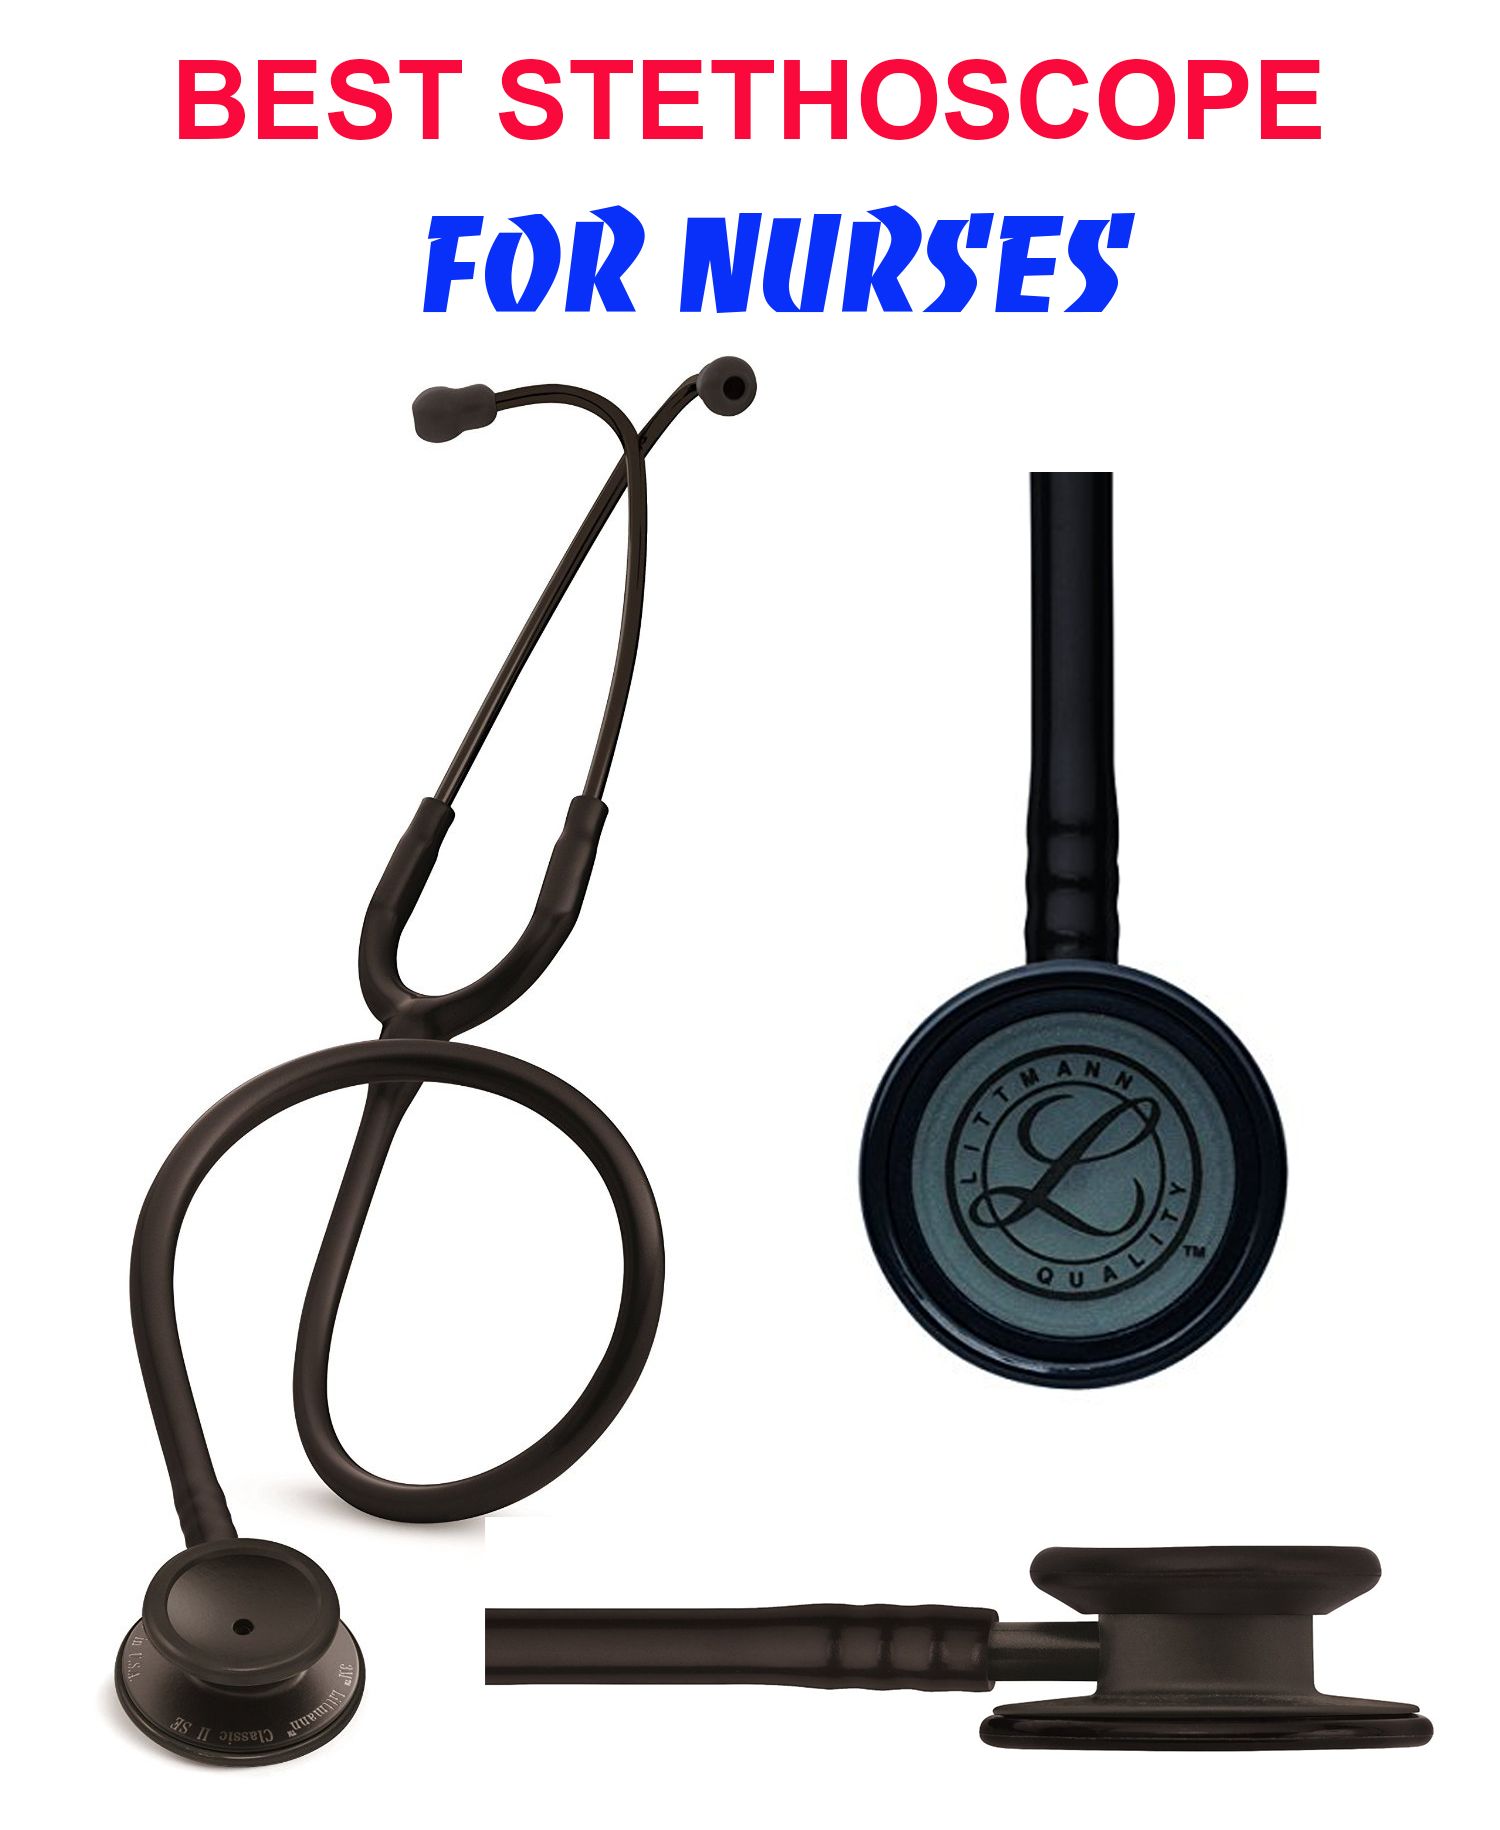 4 Best Stethoscope For Nurses Reviews Guide 2017-What's your perfect ...